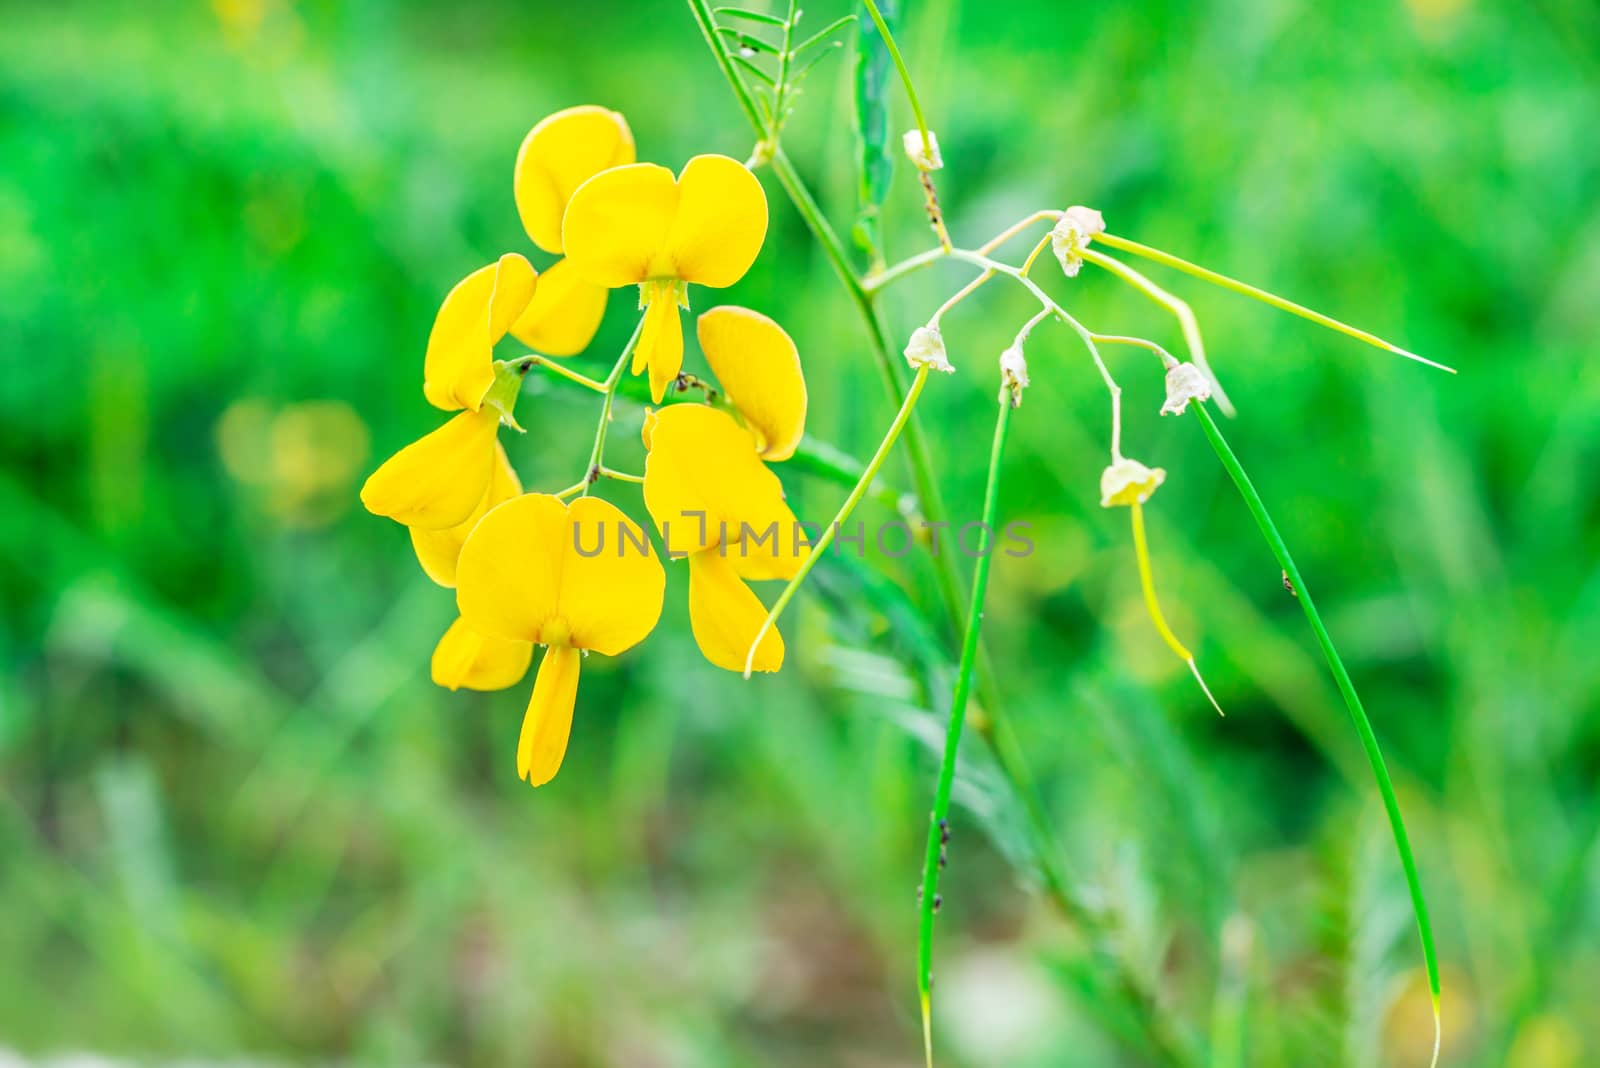 Faboideae or fabaceae, Rural yellow flower on blurred green nature background